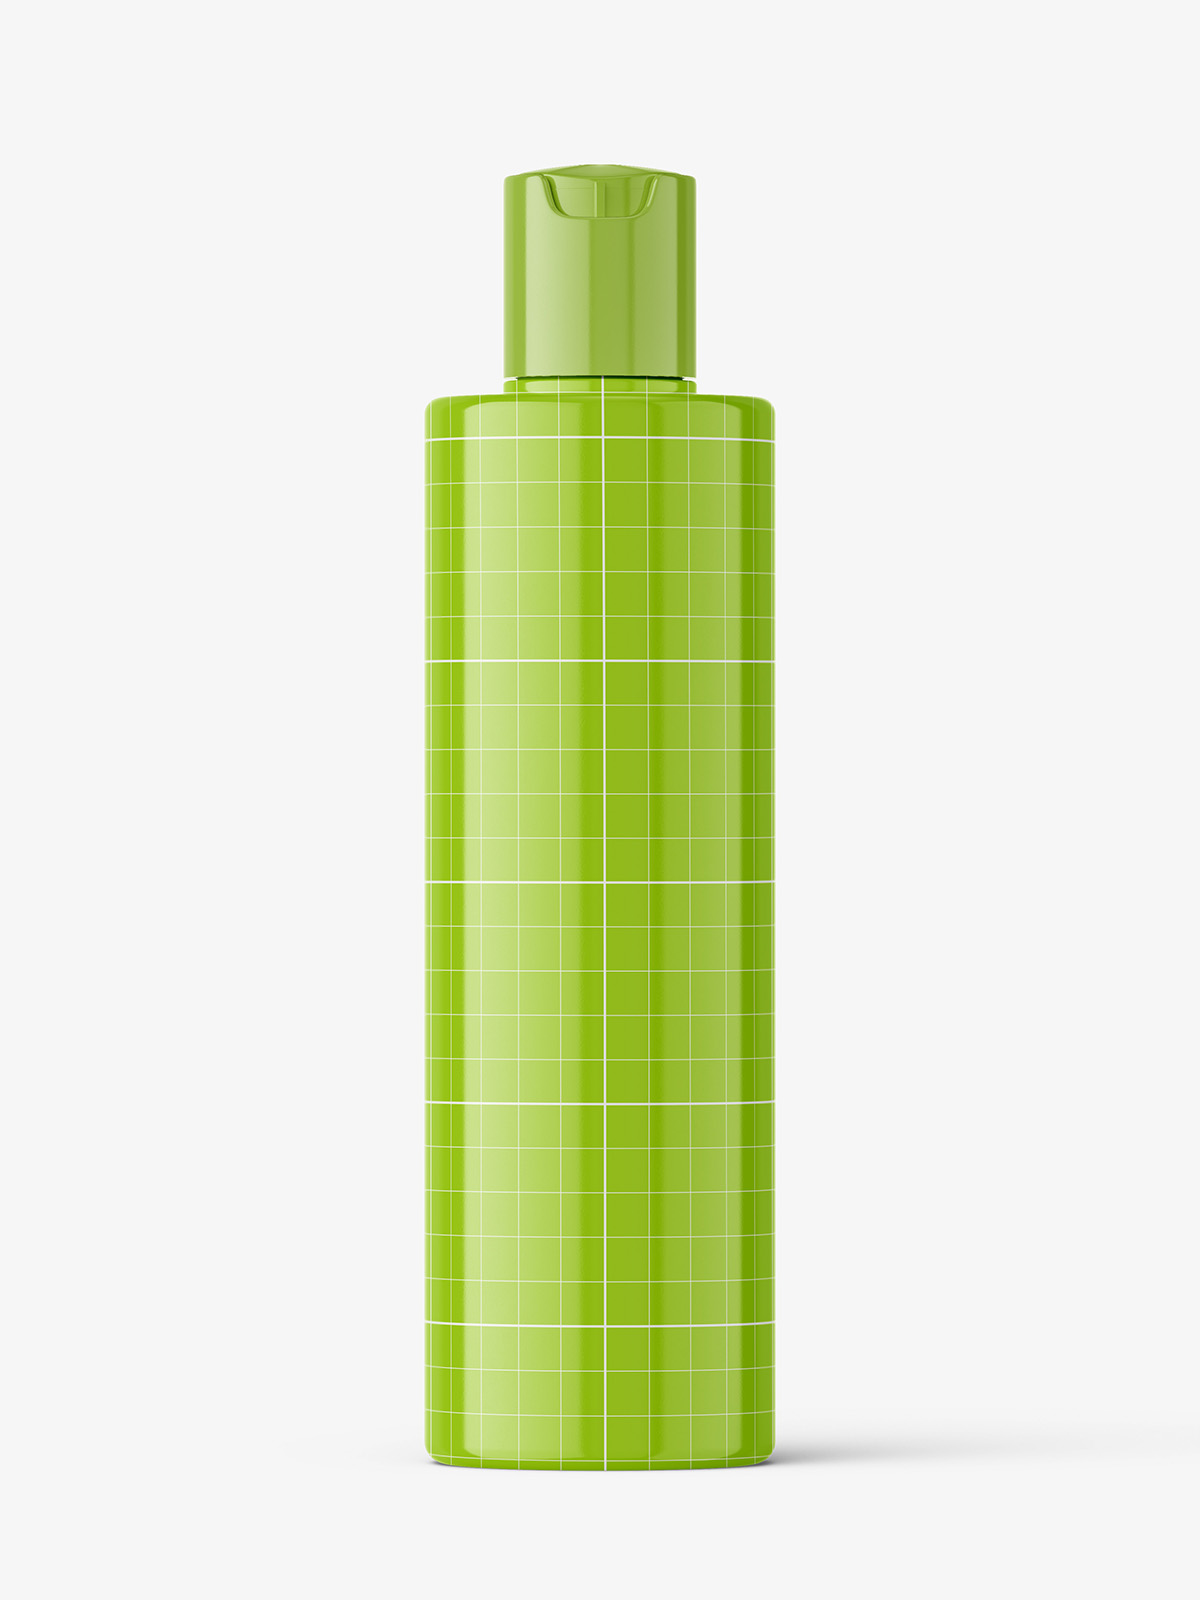 Download Cylinder Bottle With Disctop Mockup Glossy Smarty Mockups